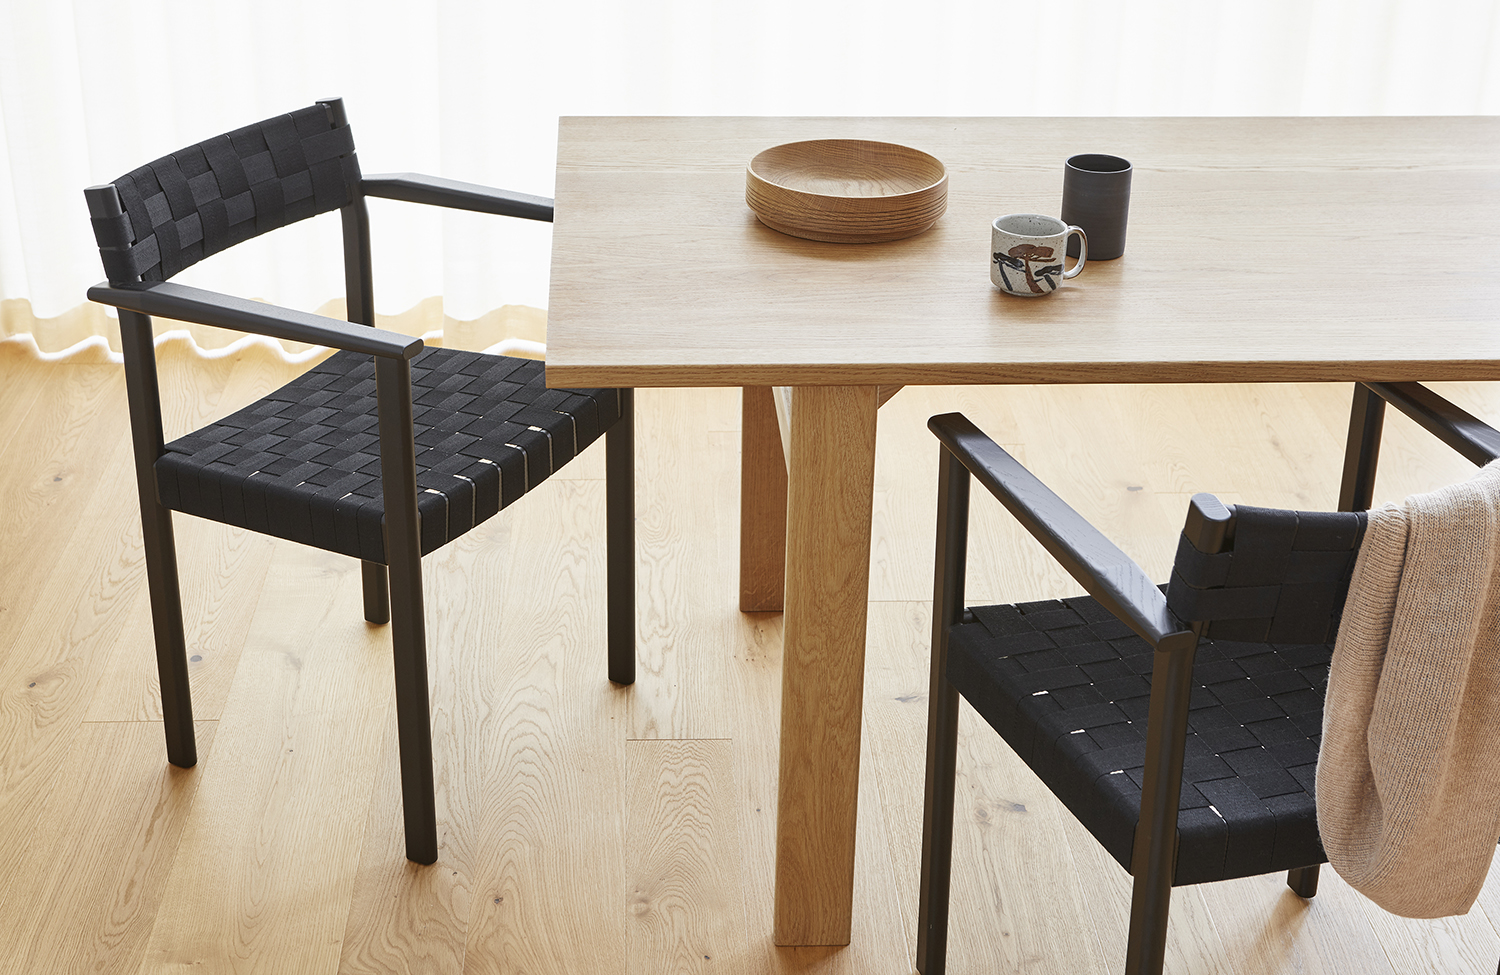 Form-and-Refine_Living_Motif-Armchair-Black_Damsbo-Dining-Table